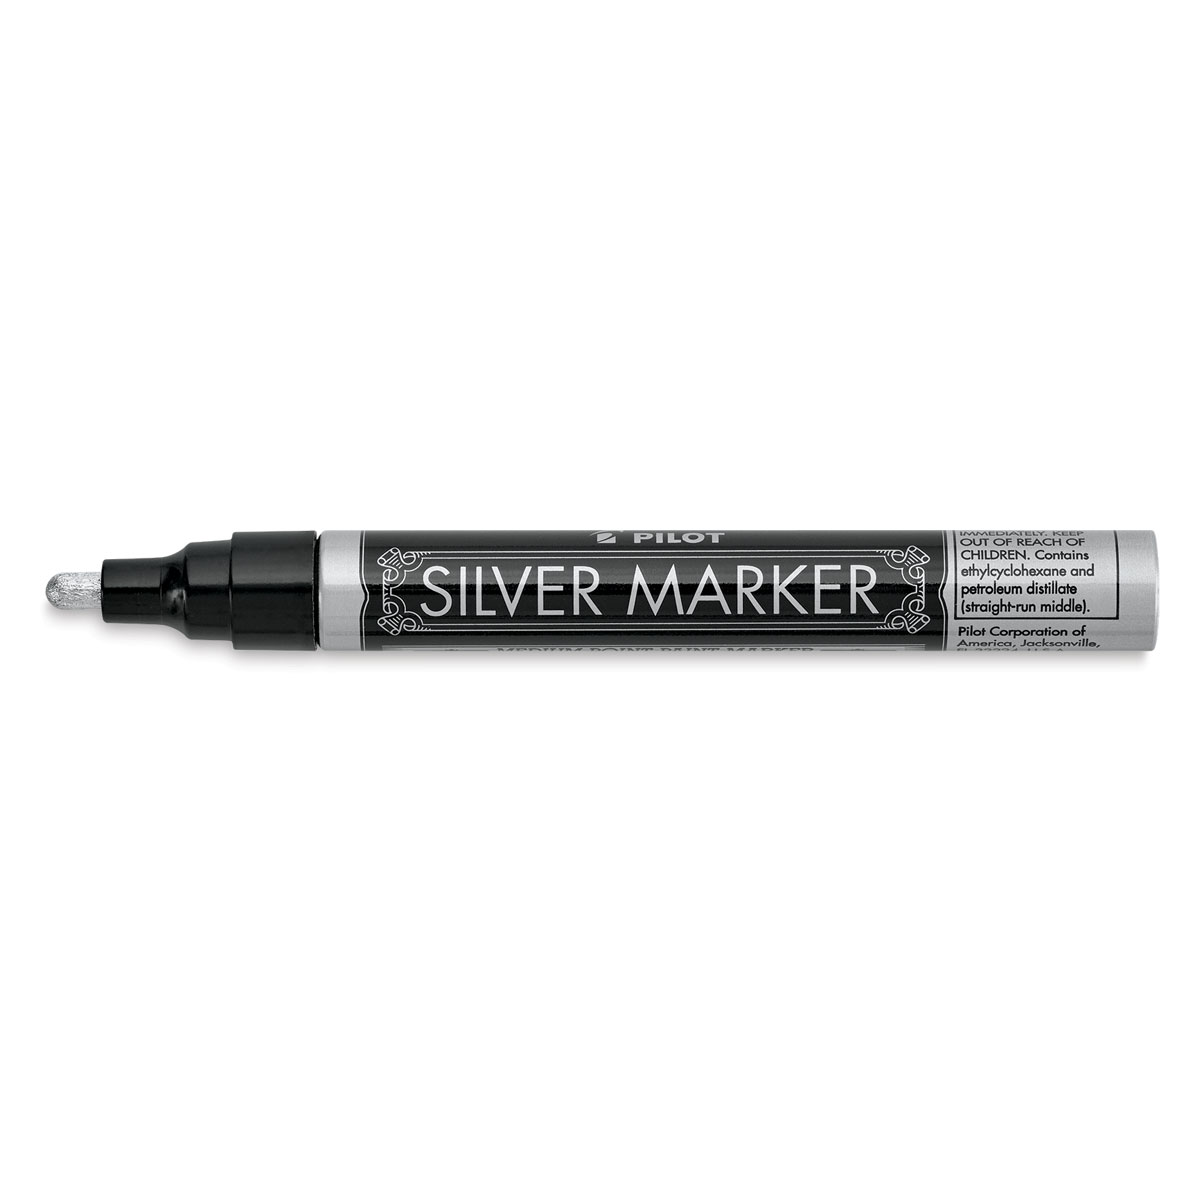 Pilot Gold and Silver Marking Pens